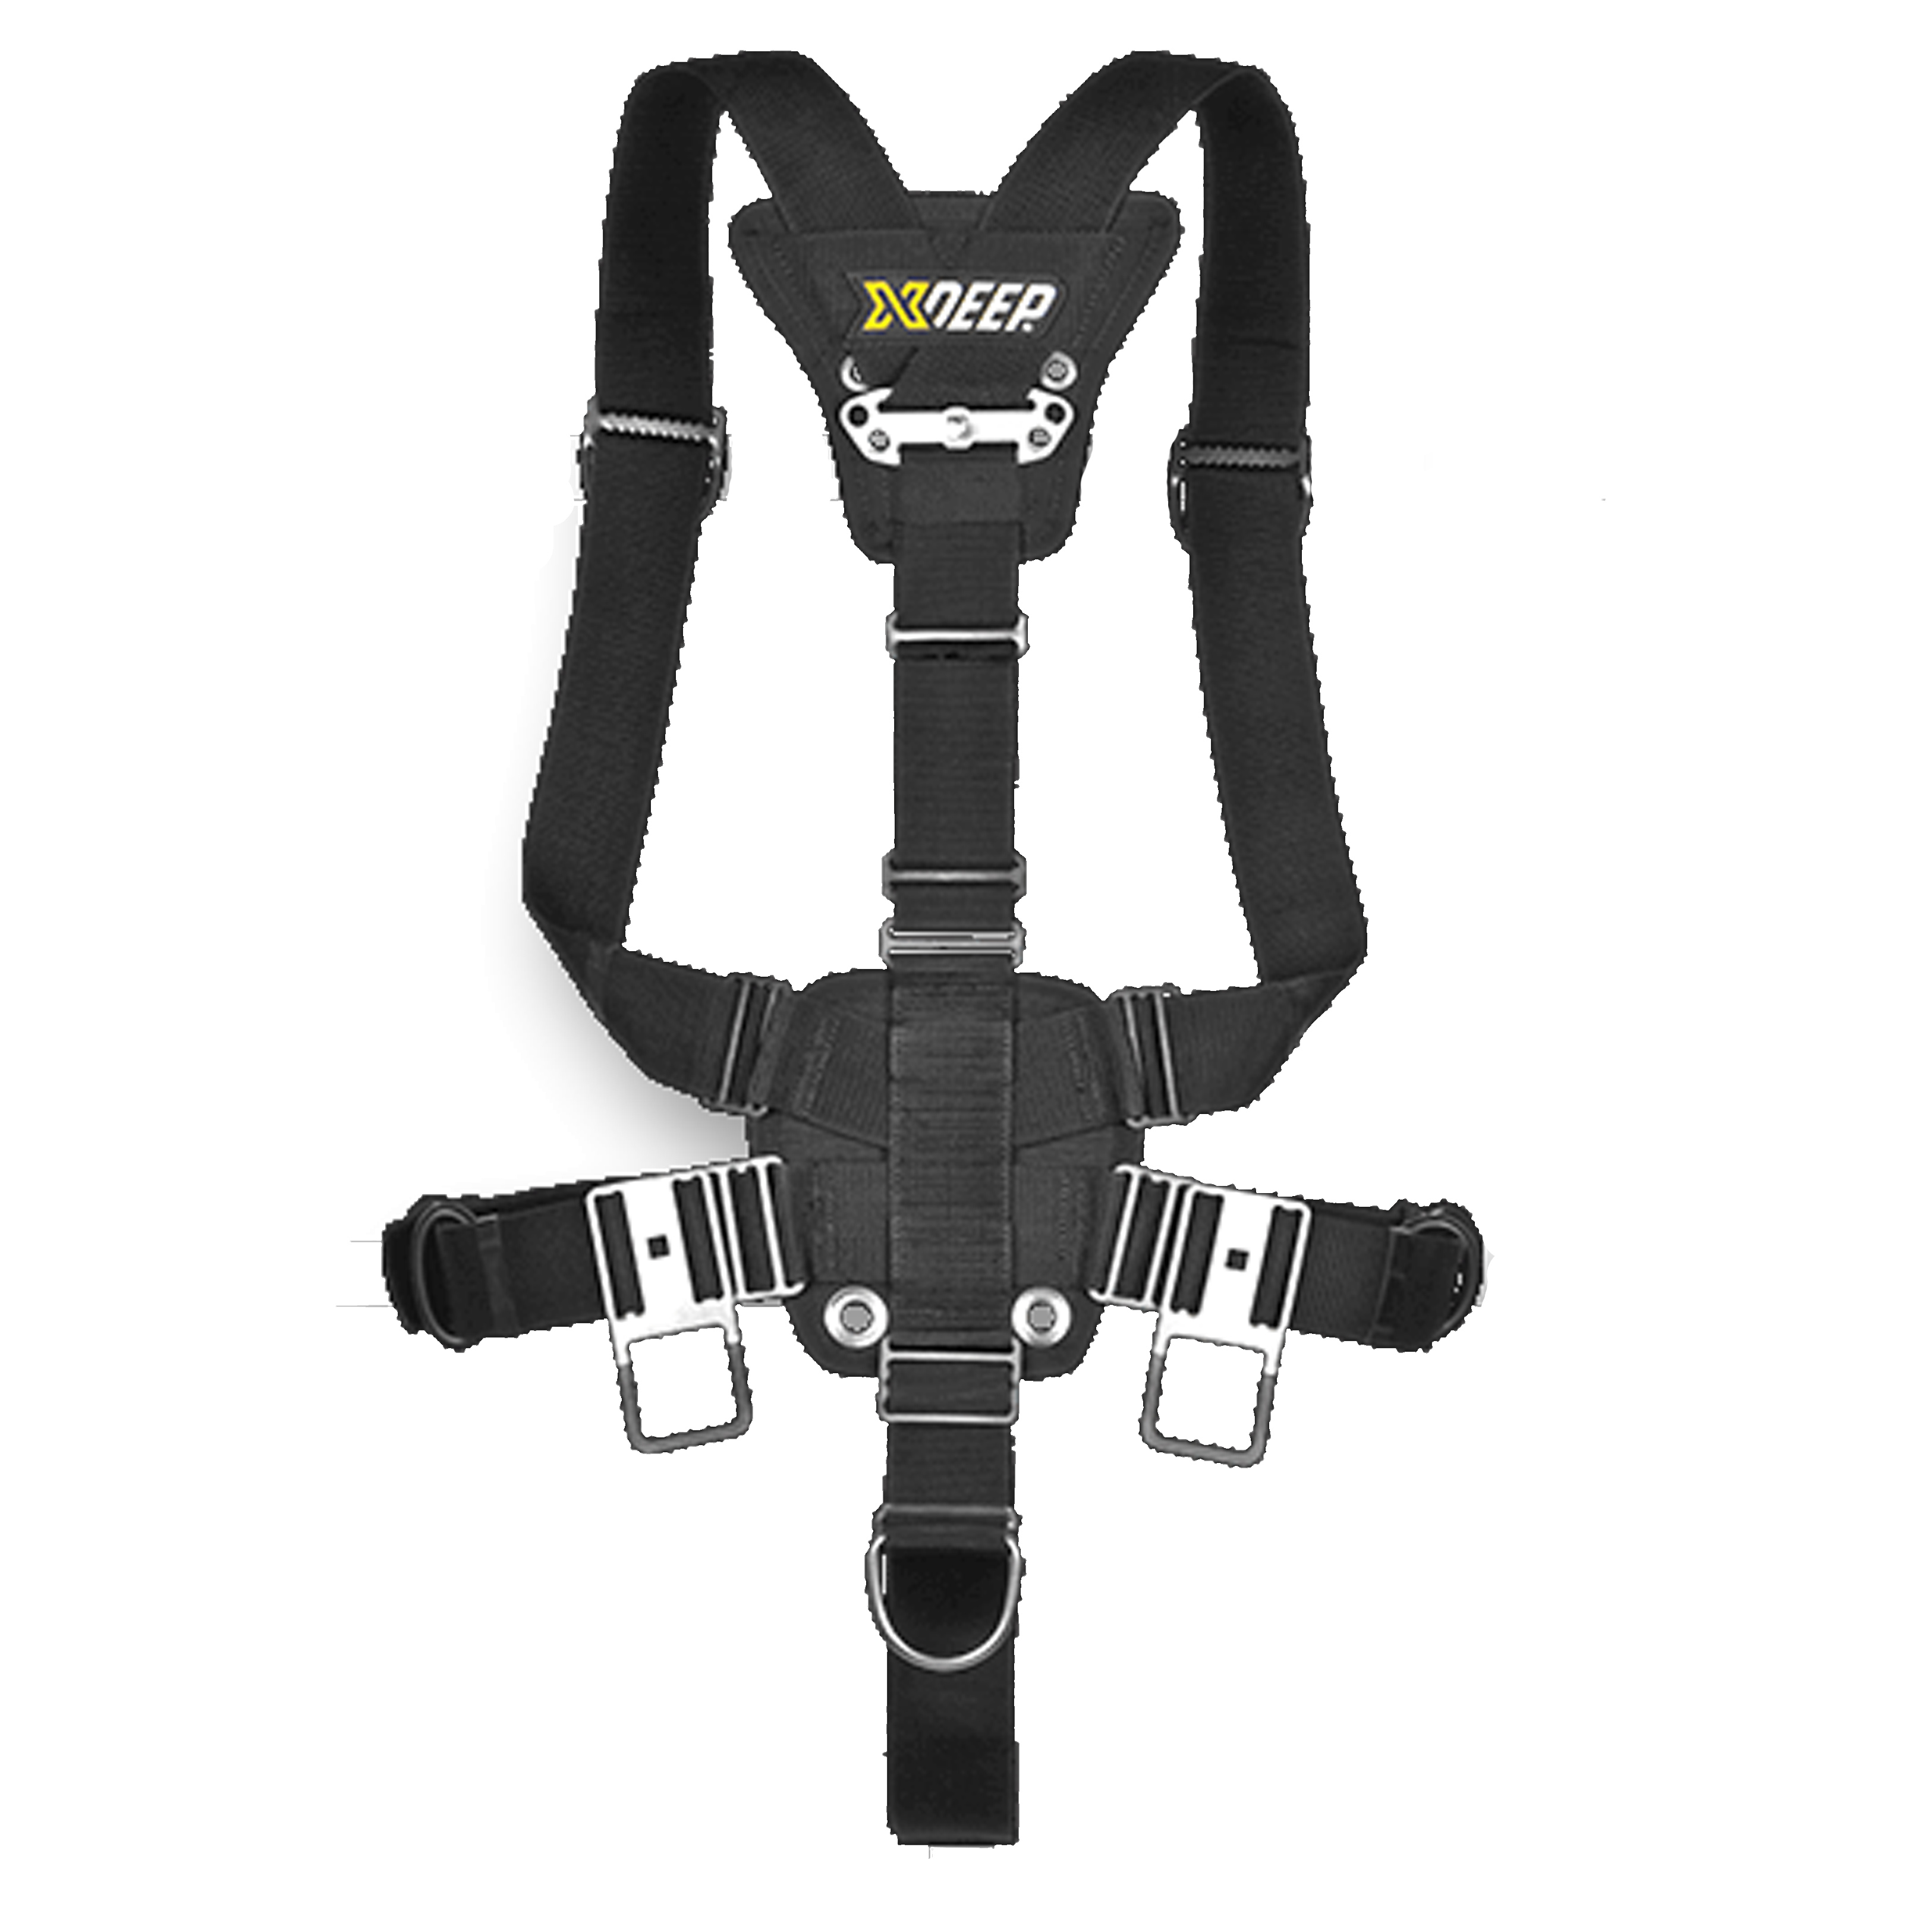 XDEEP Stealth 2.0 Harness Set with Central Weight Pocket